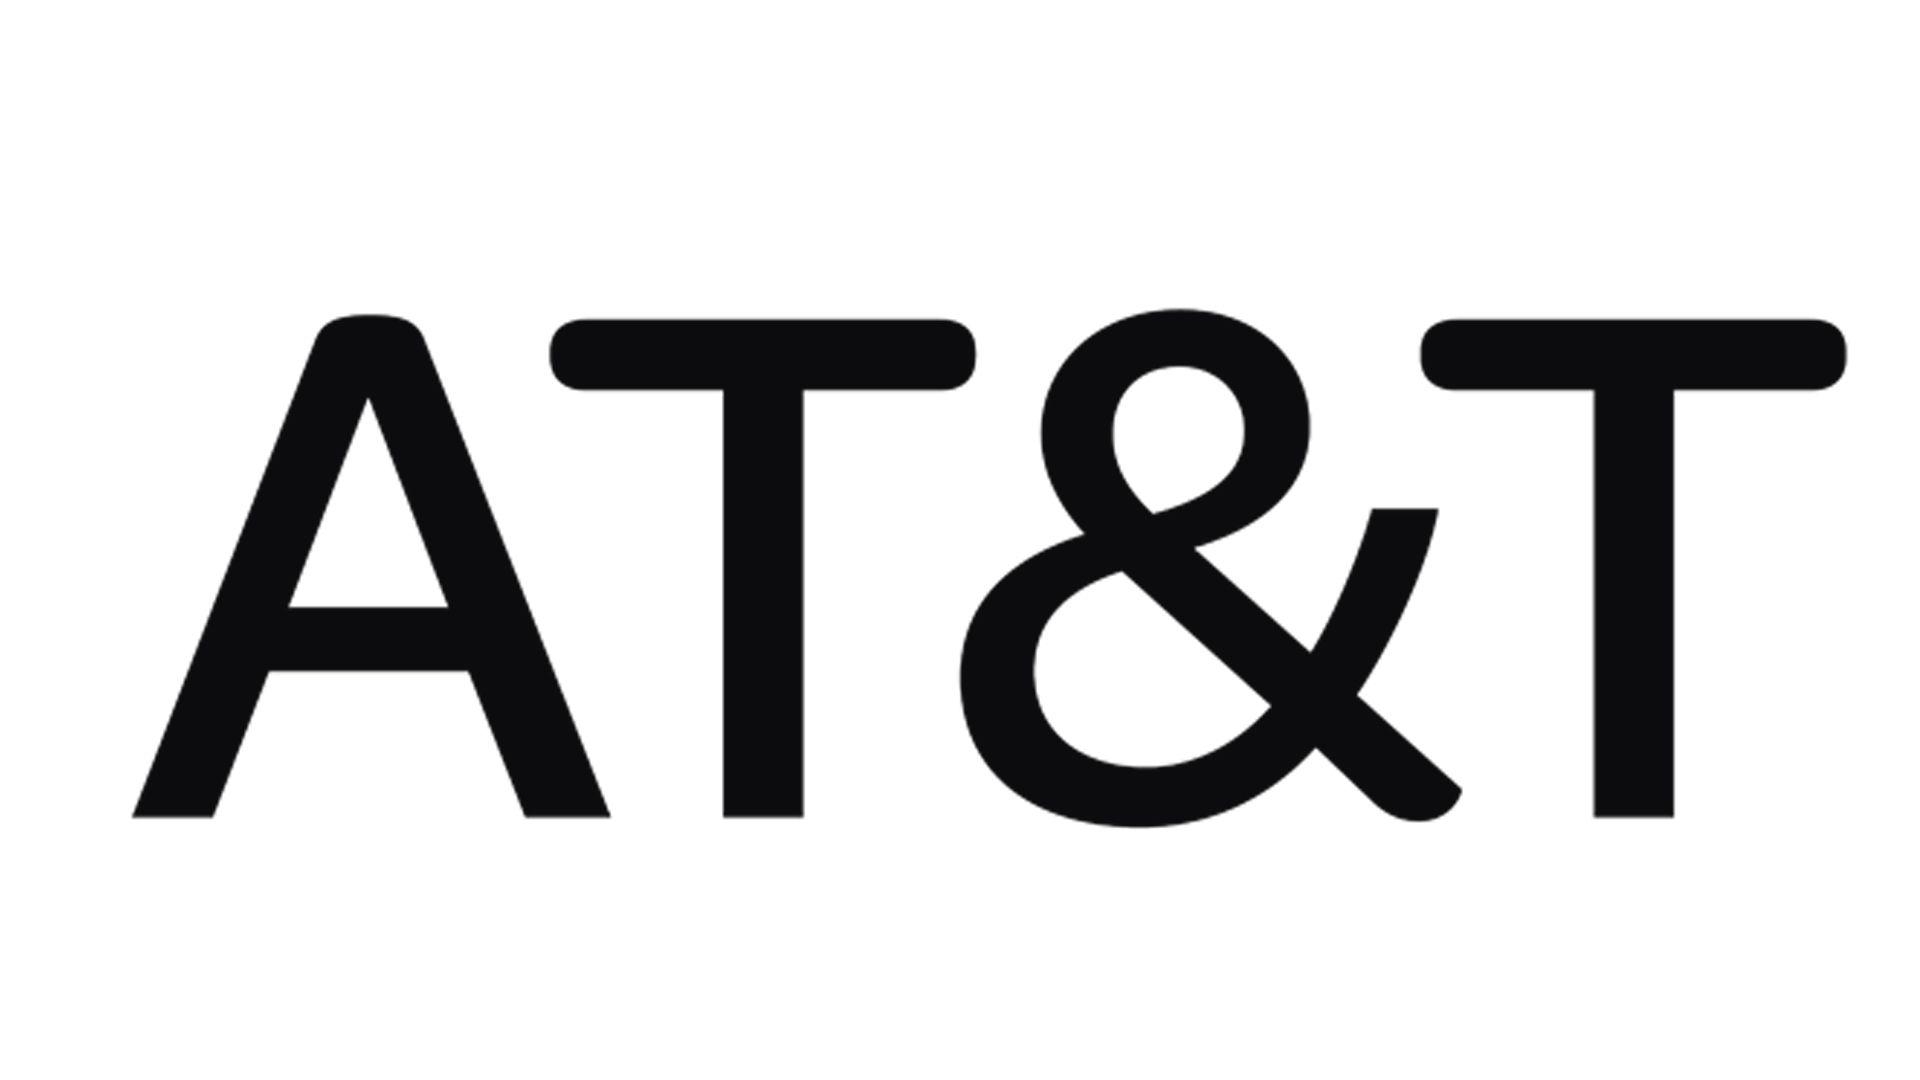 AT& T Logo - AT&T Logo, AT&T Symbol Meaning, History and Evolution